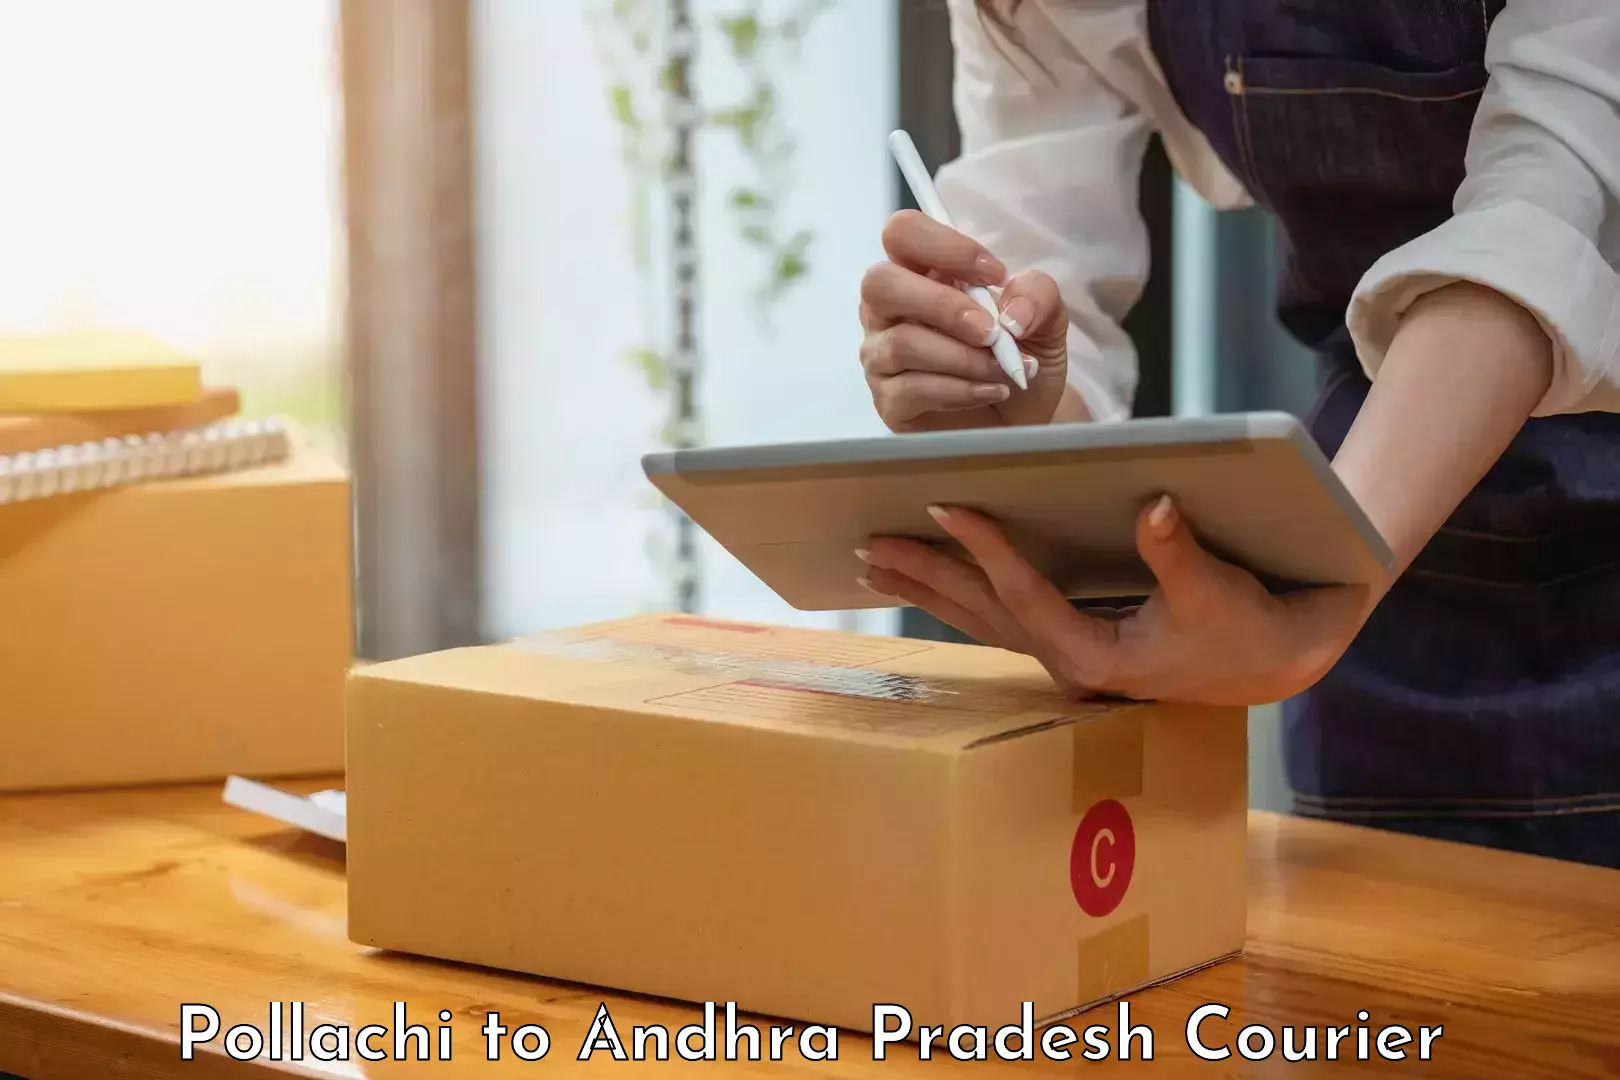 Lightweight parcel options Pollachi to Gopalapatnam